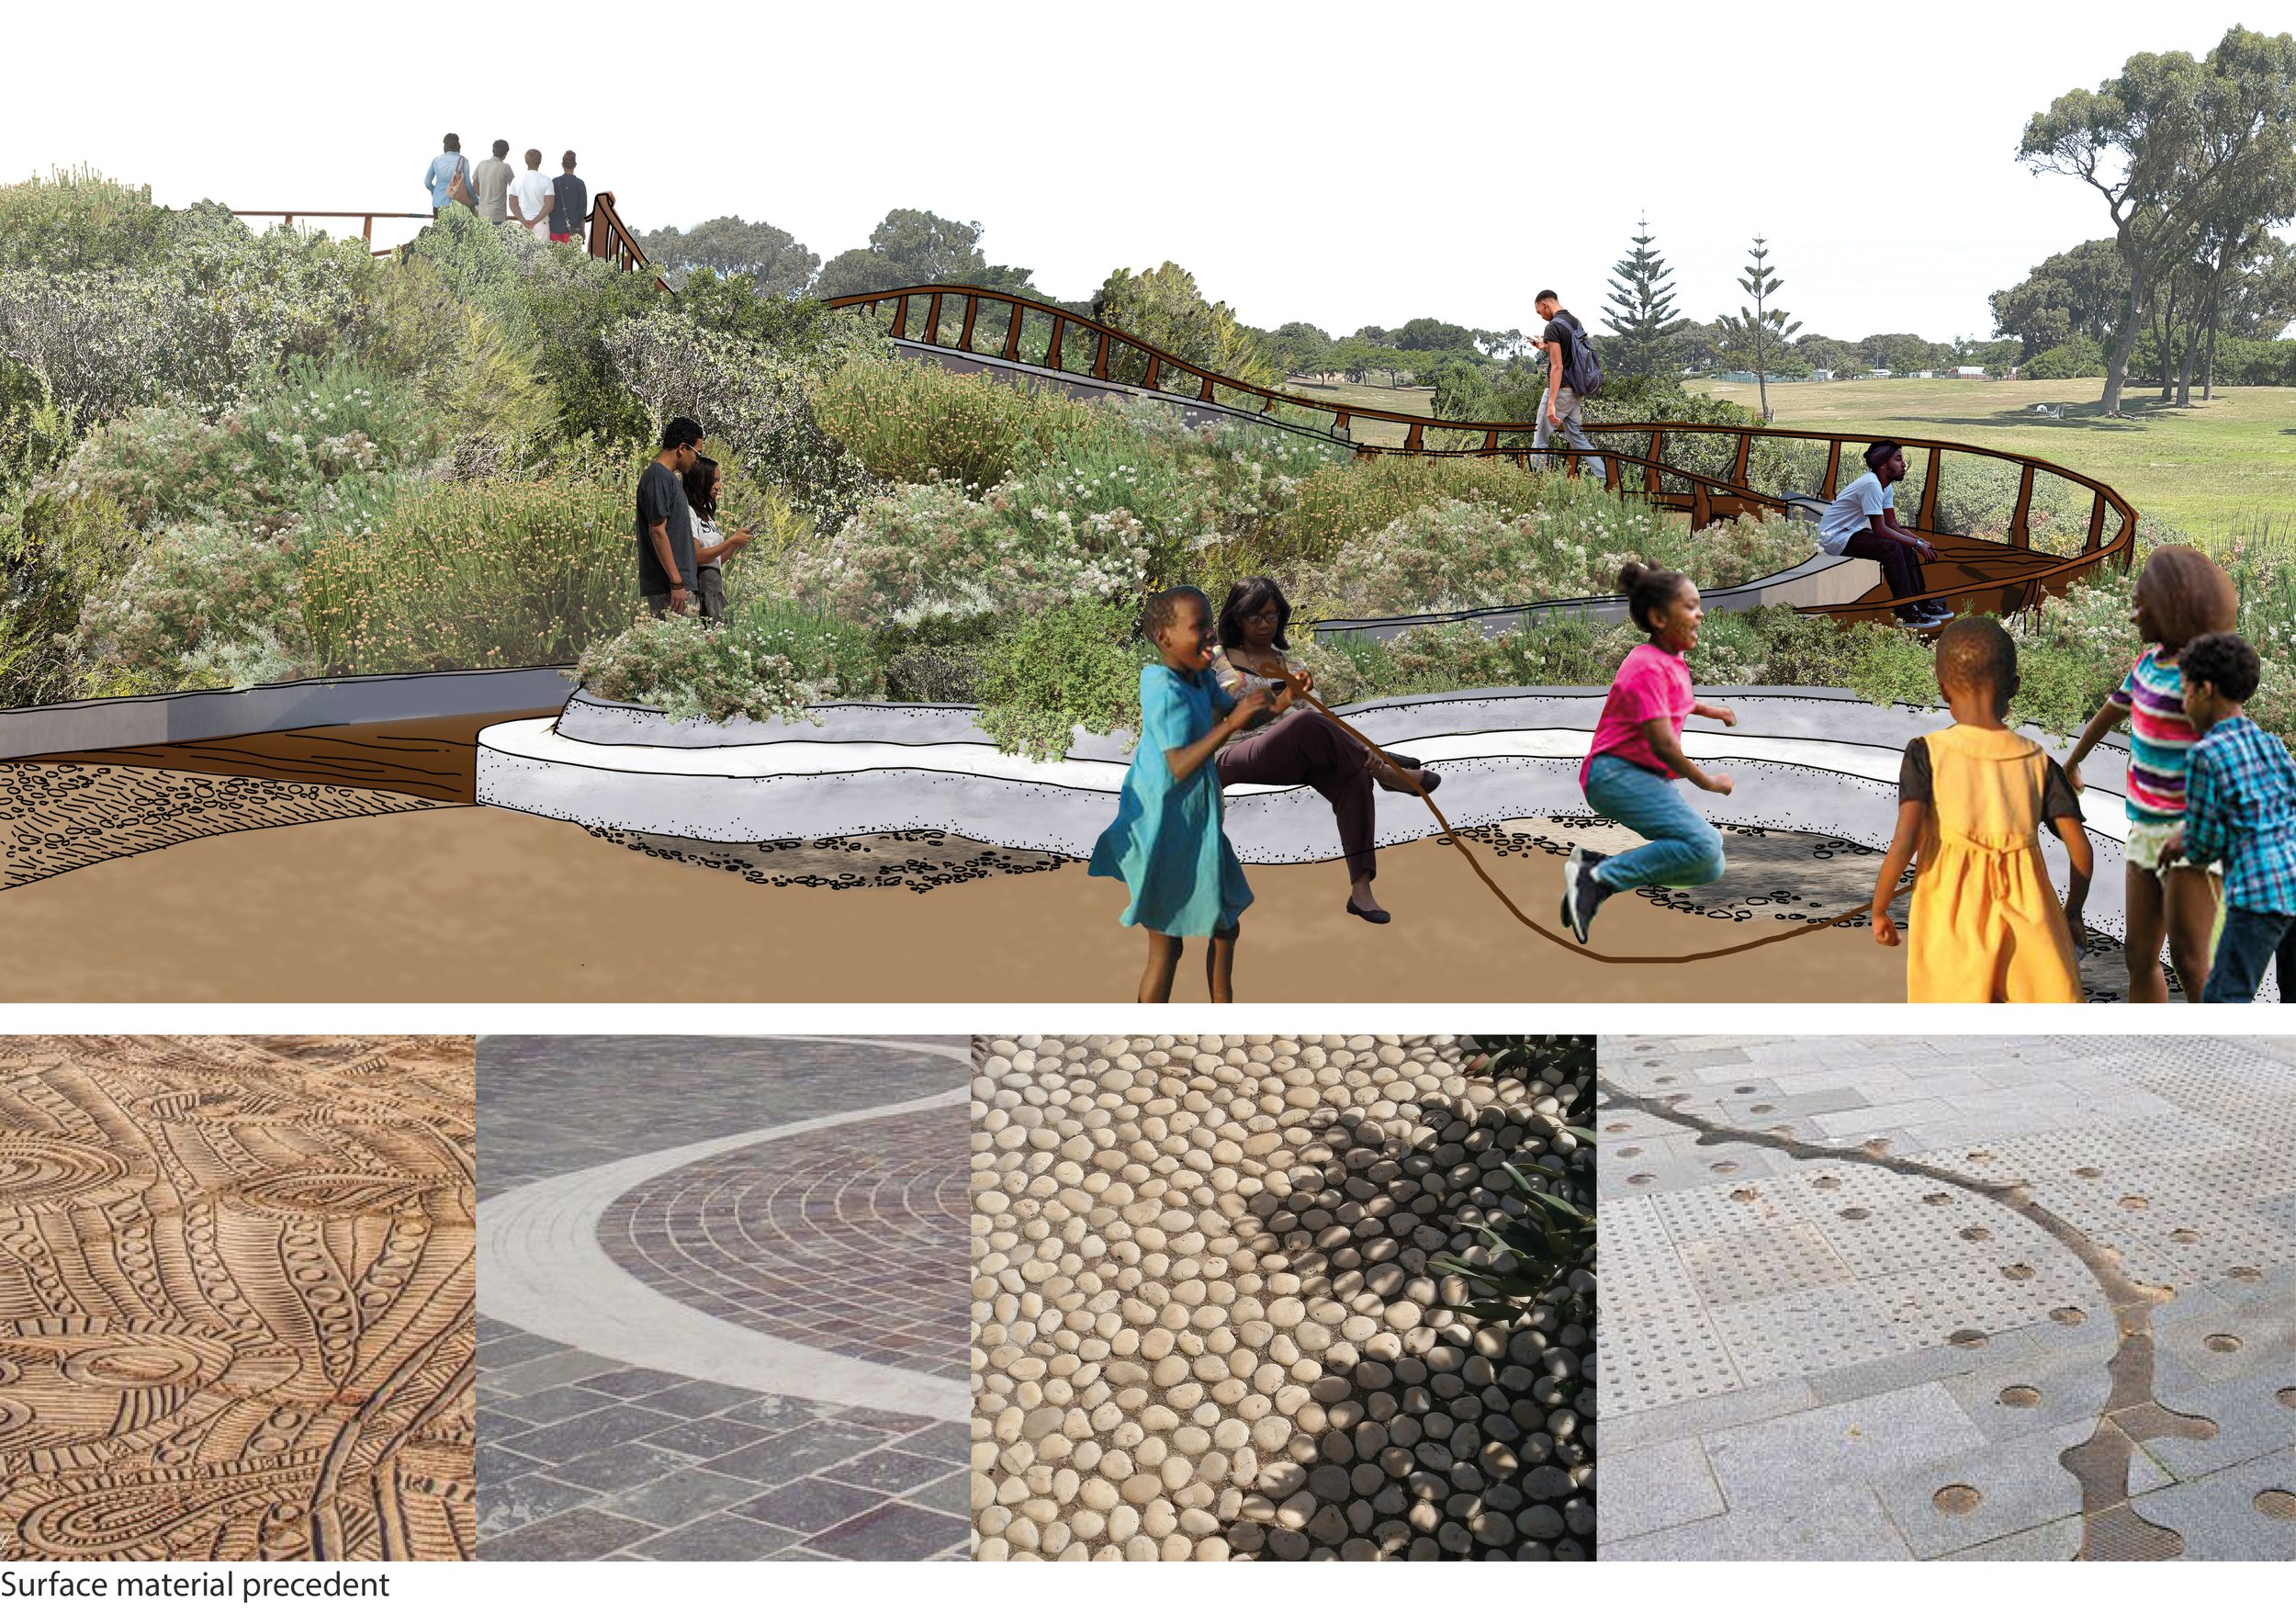   The Molslang Walkway (for elaborated concept see: Westridge Park, Molslang Concept Design)   A new boardwalk is proposed for the Biodiversity Dune that will be universally accessible for all users of the park. The name of this boardwalk has been te